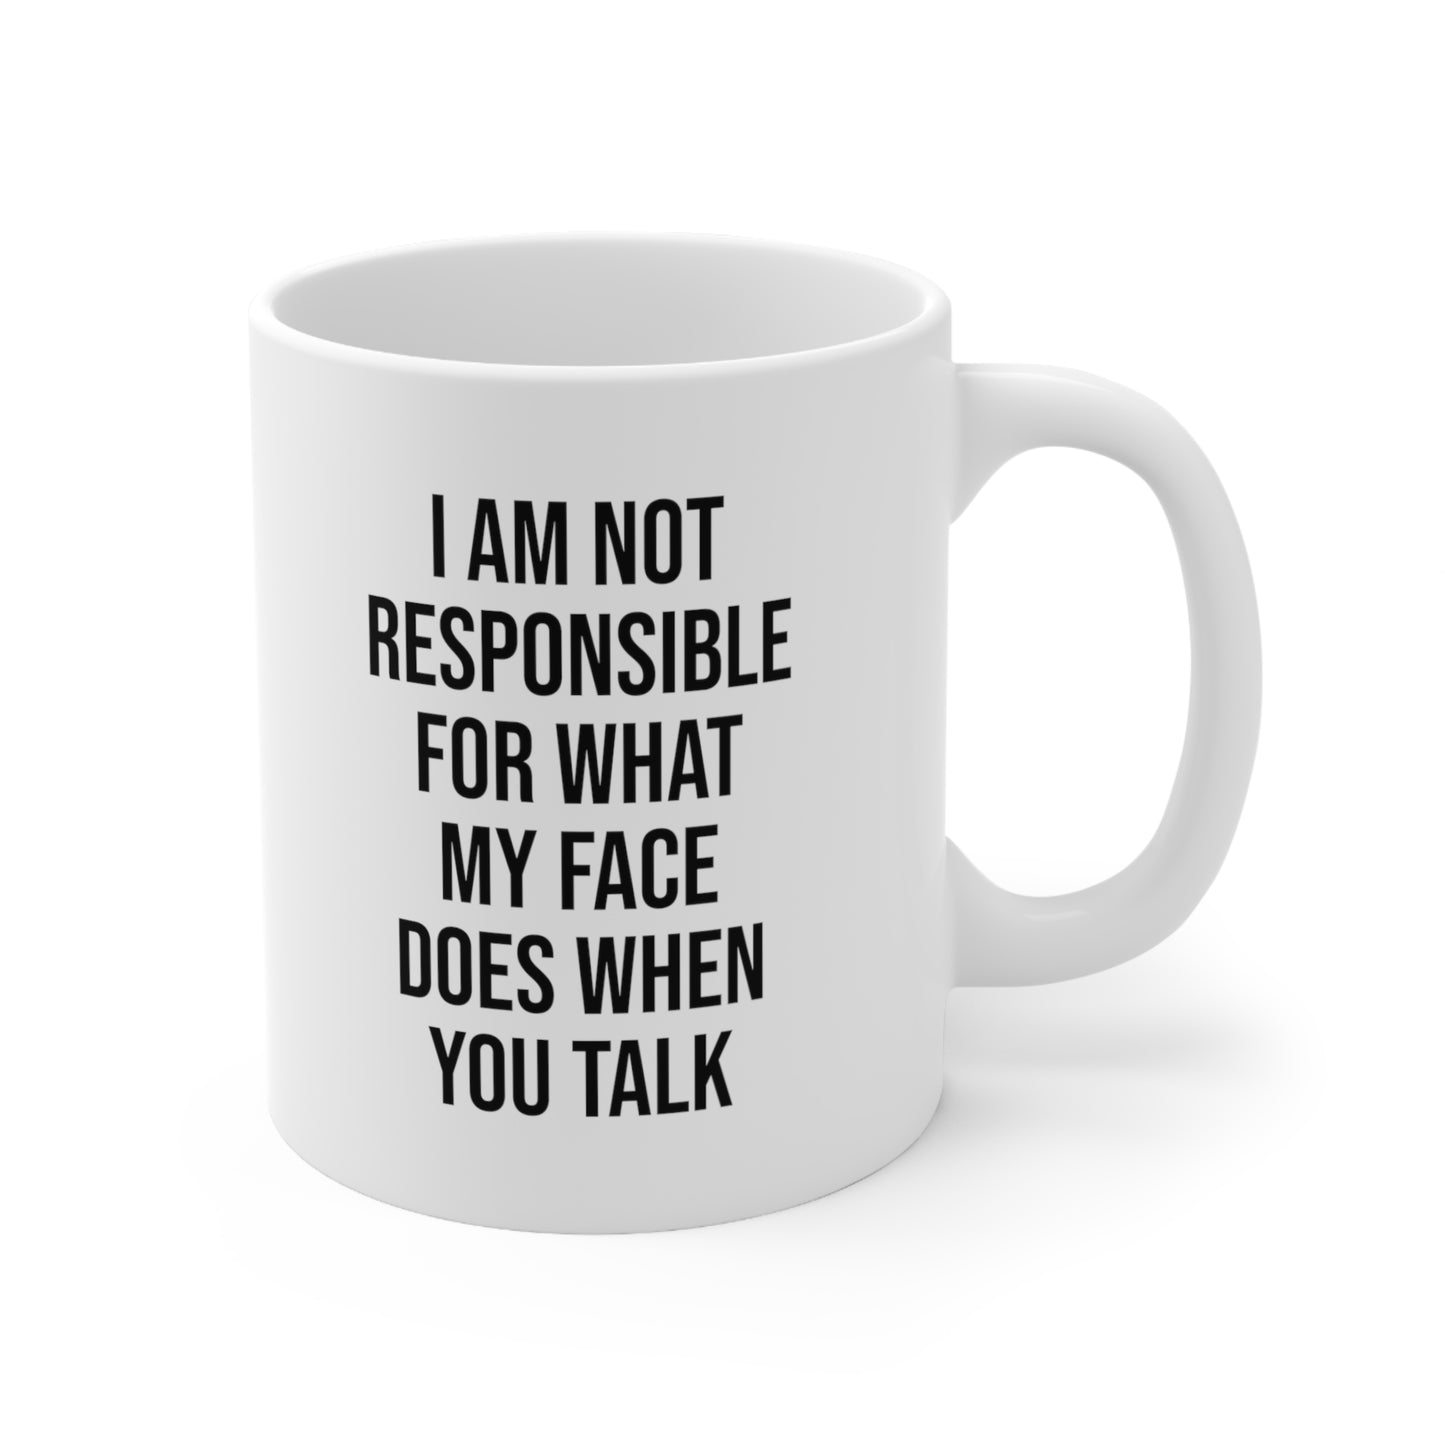 I am not responsible for what my face does when you talk Coffee Mug 11oz